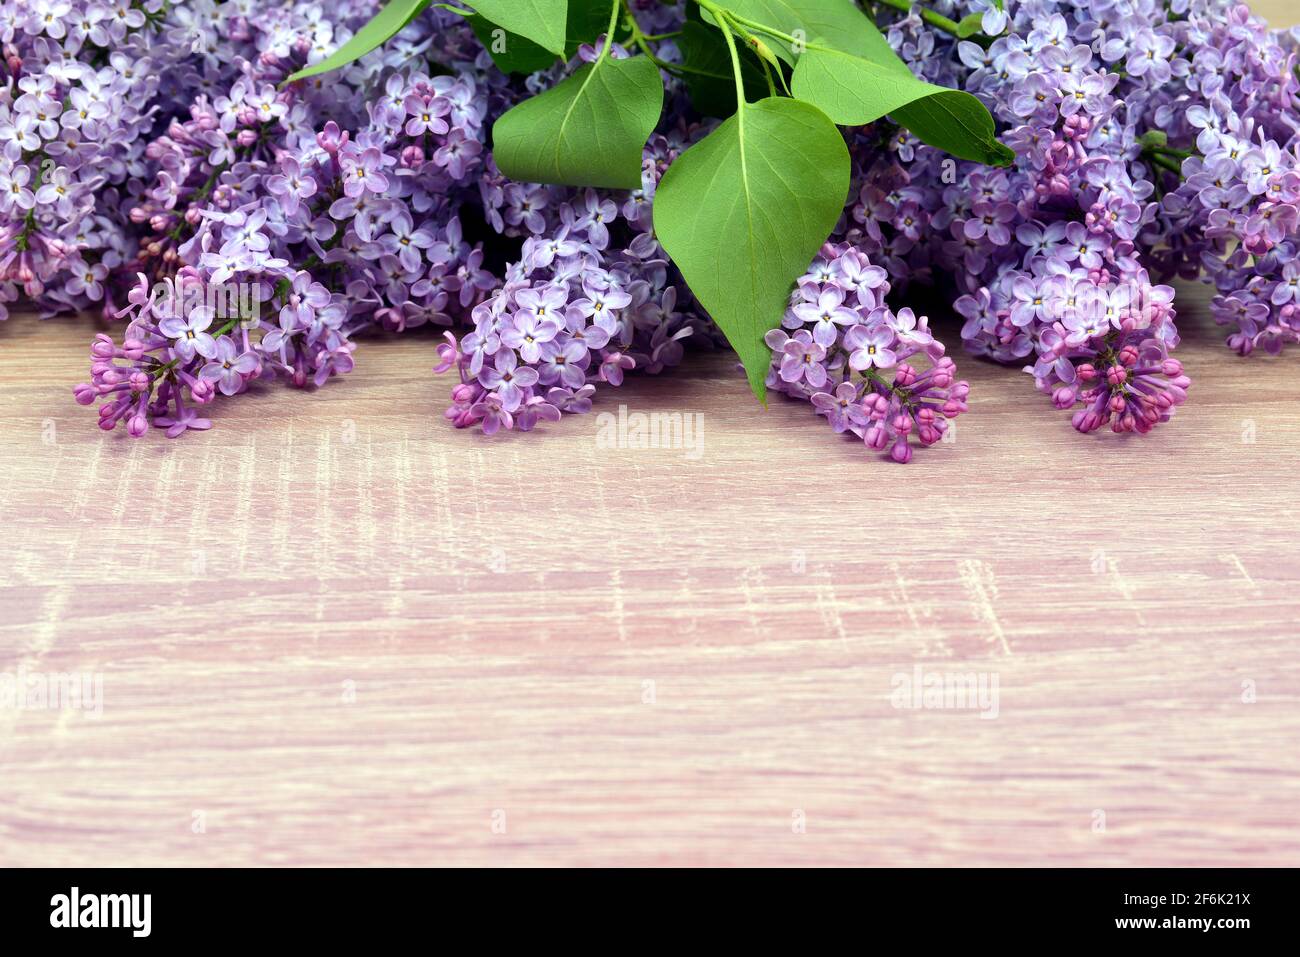 Blooming lilac flowers with green leaves on wooden board. Stock Photo